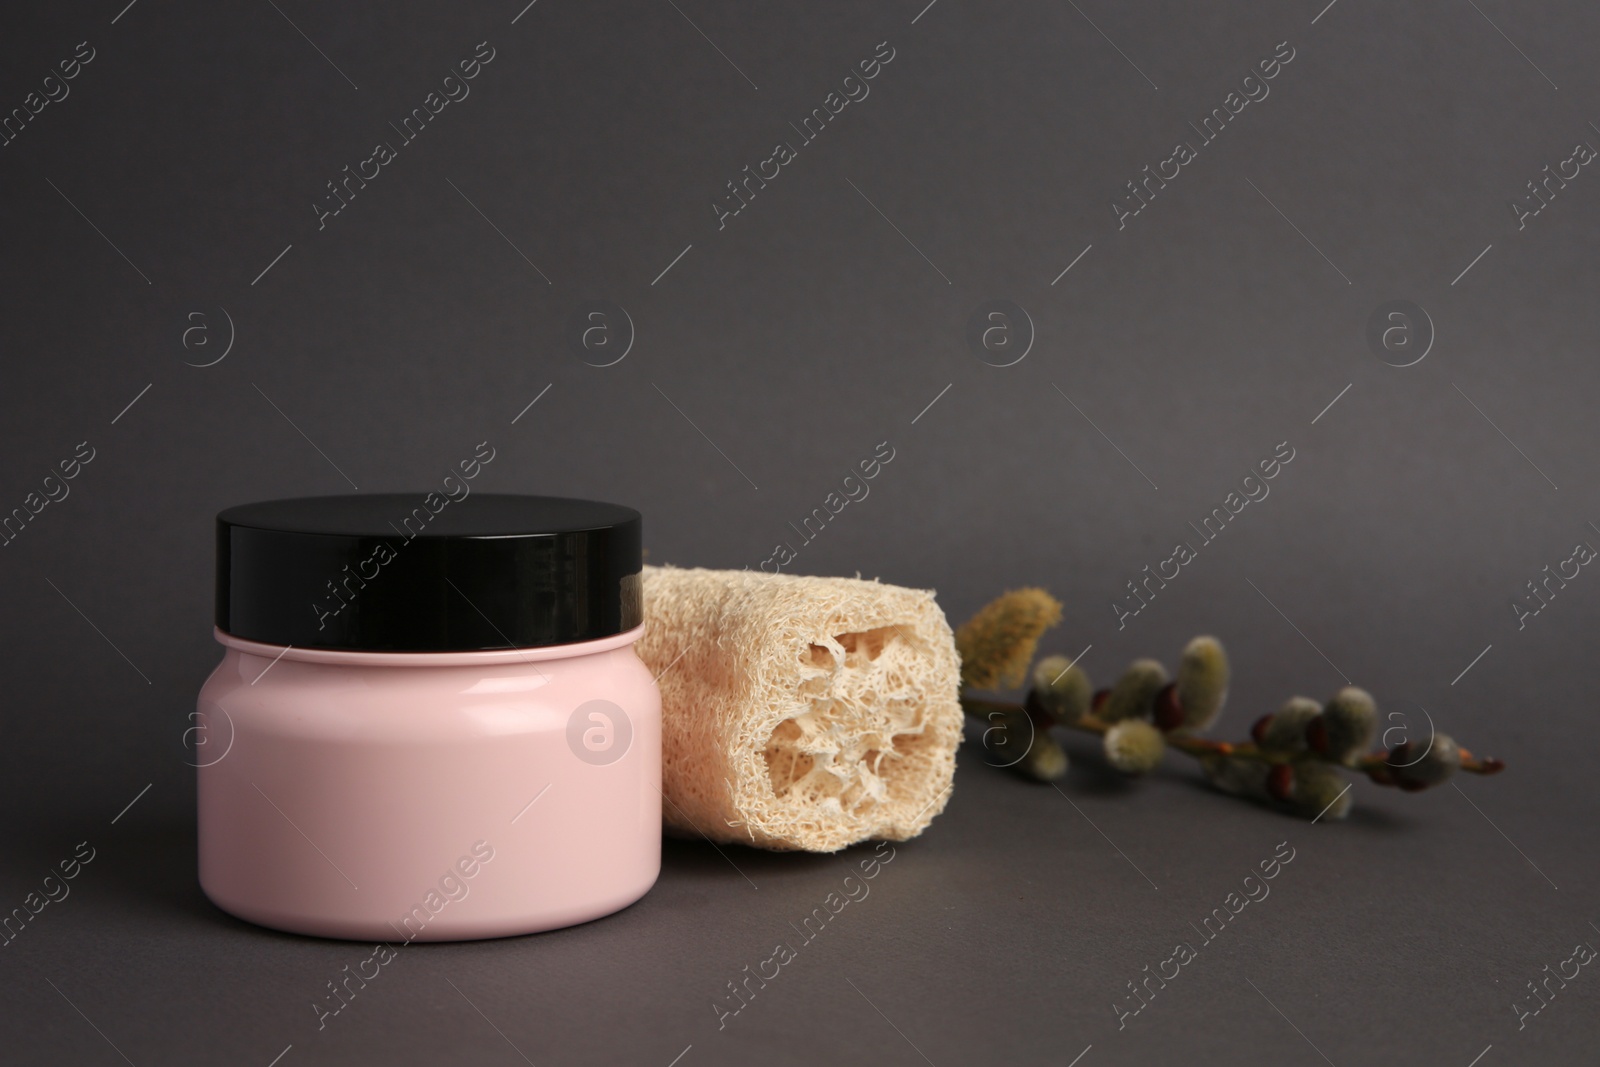 Photo of Jar with cosmetic product, loofah sponge and willow branch on dark grey background